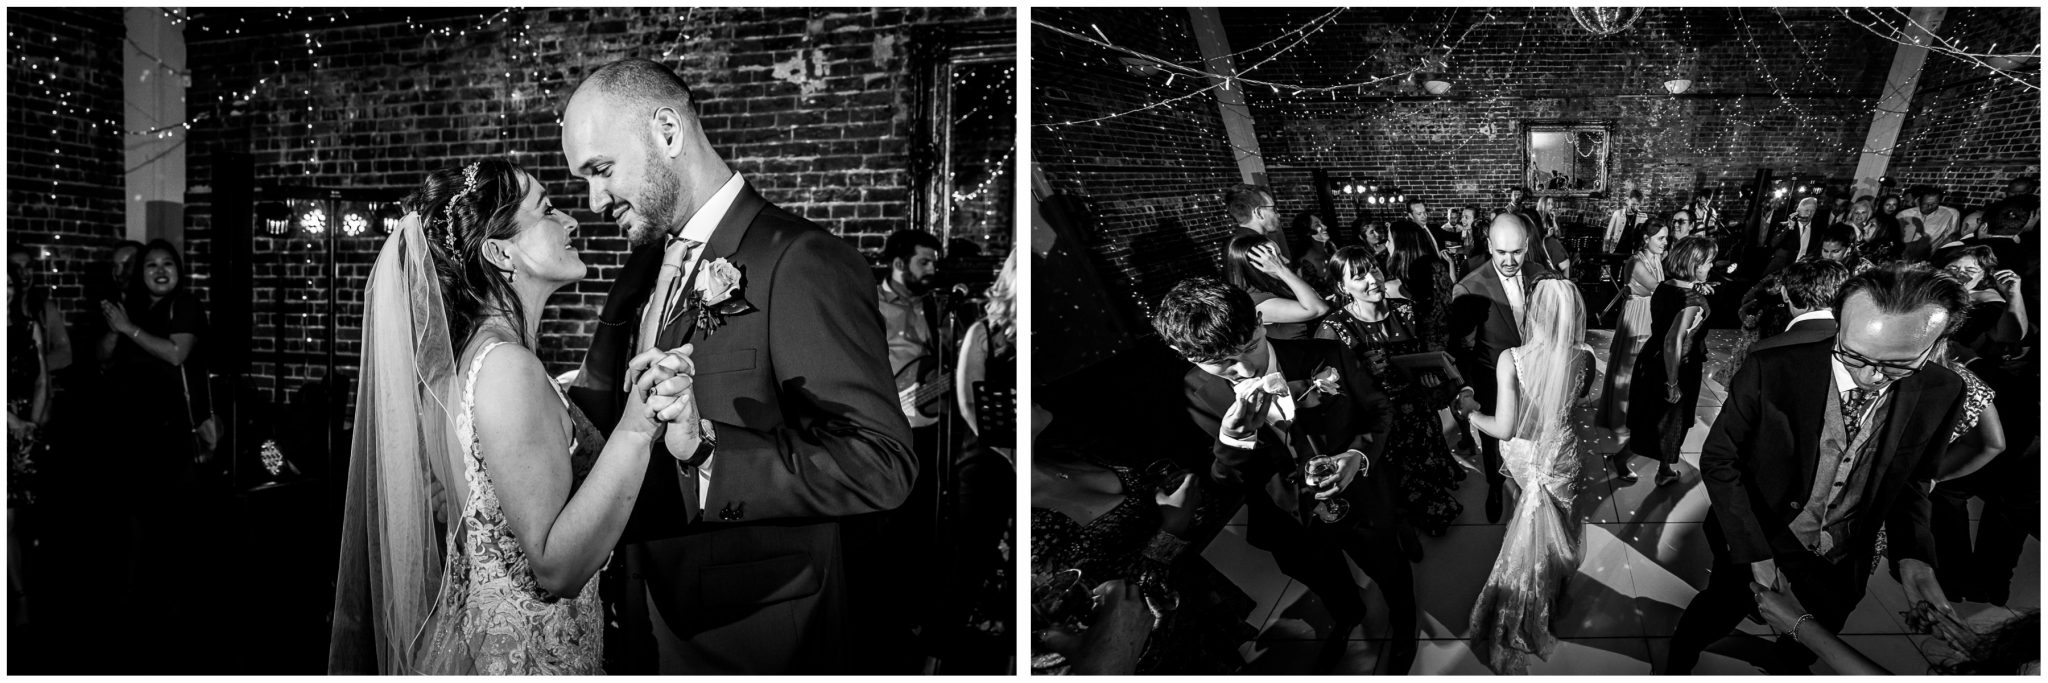 Black and white images of evening wedding celebrations at Highcliffe Castle